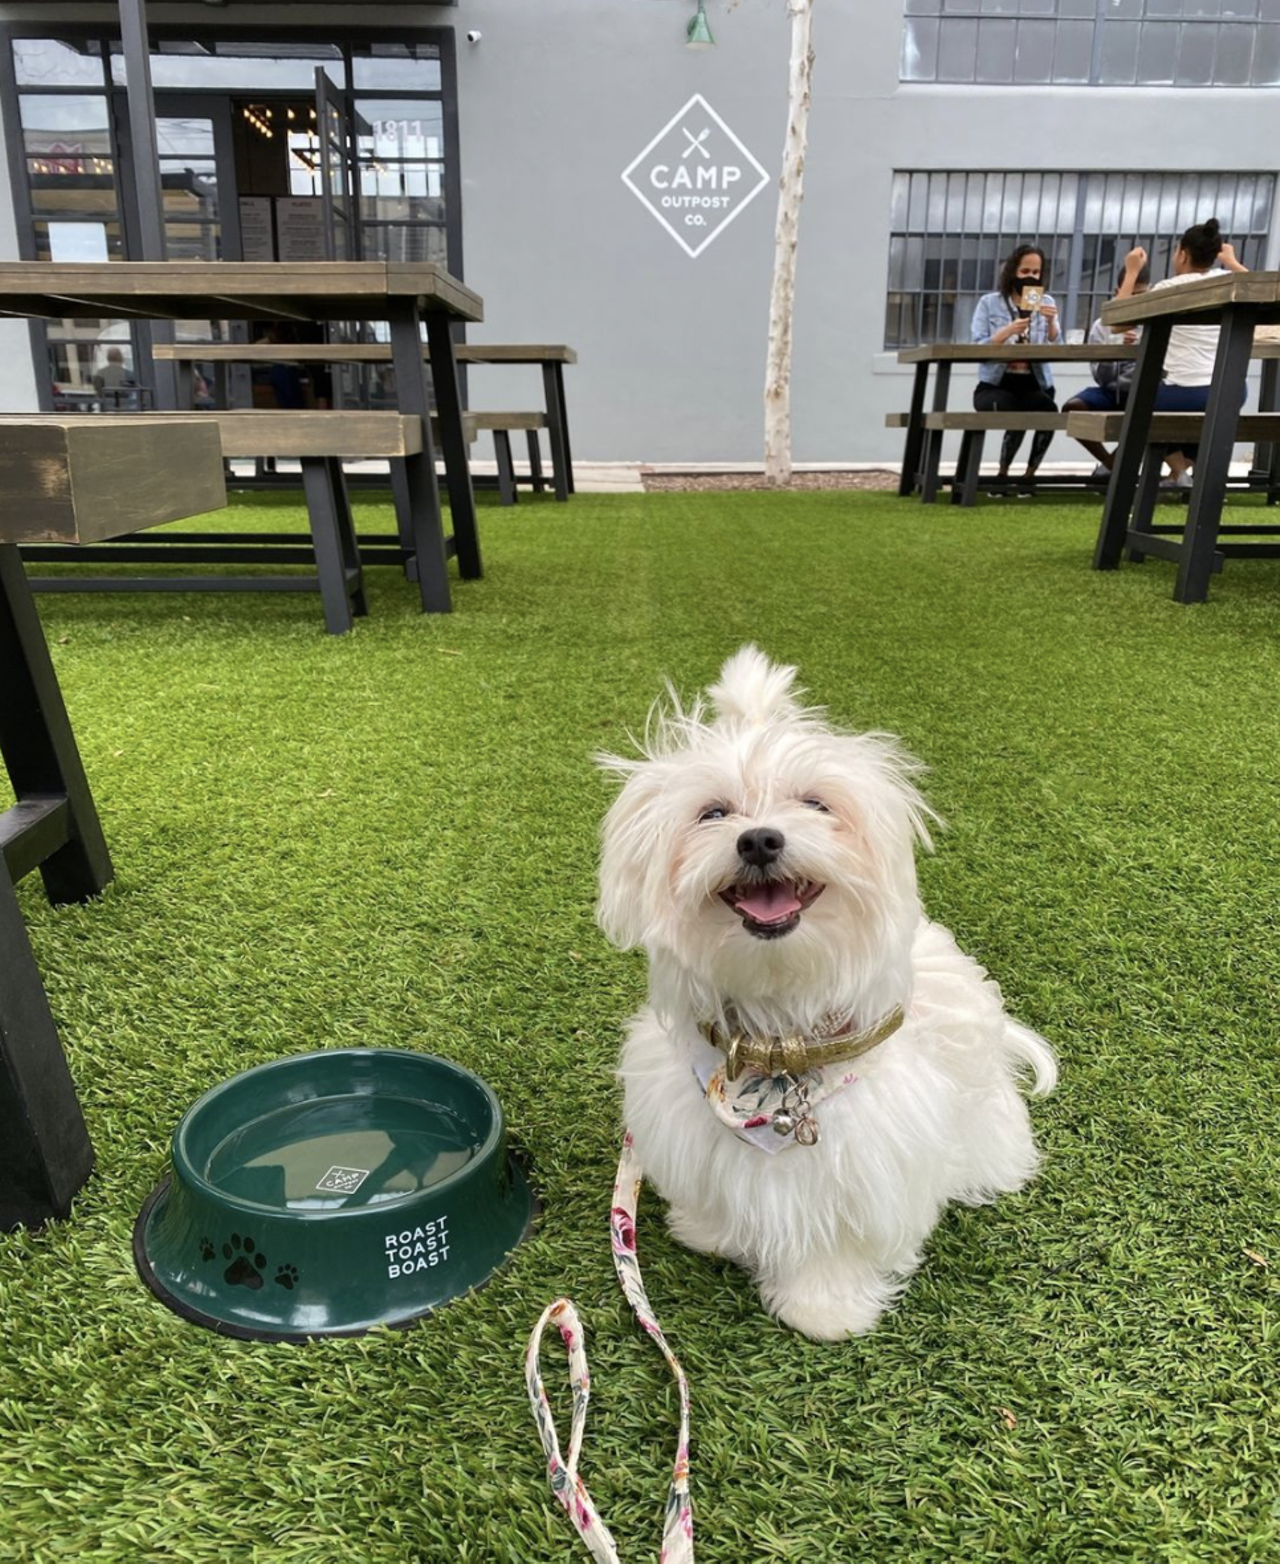 Camp Outpost
Mask Required
1811 S Alamo St, (210) 942-4690, eatatcamp.com
Camp Outpost caters to you and your dog! Choose from a variety of American food while your dog is provided with a Camp Outpost bowl to stay hydrated in the sun. 
Photo via Instagram / eatatcamp